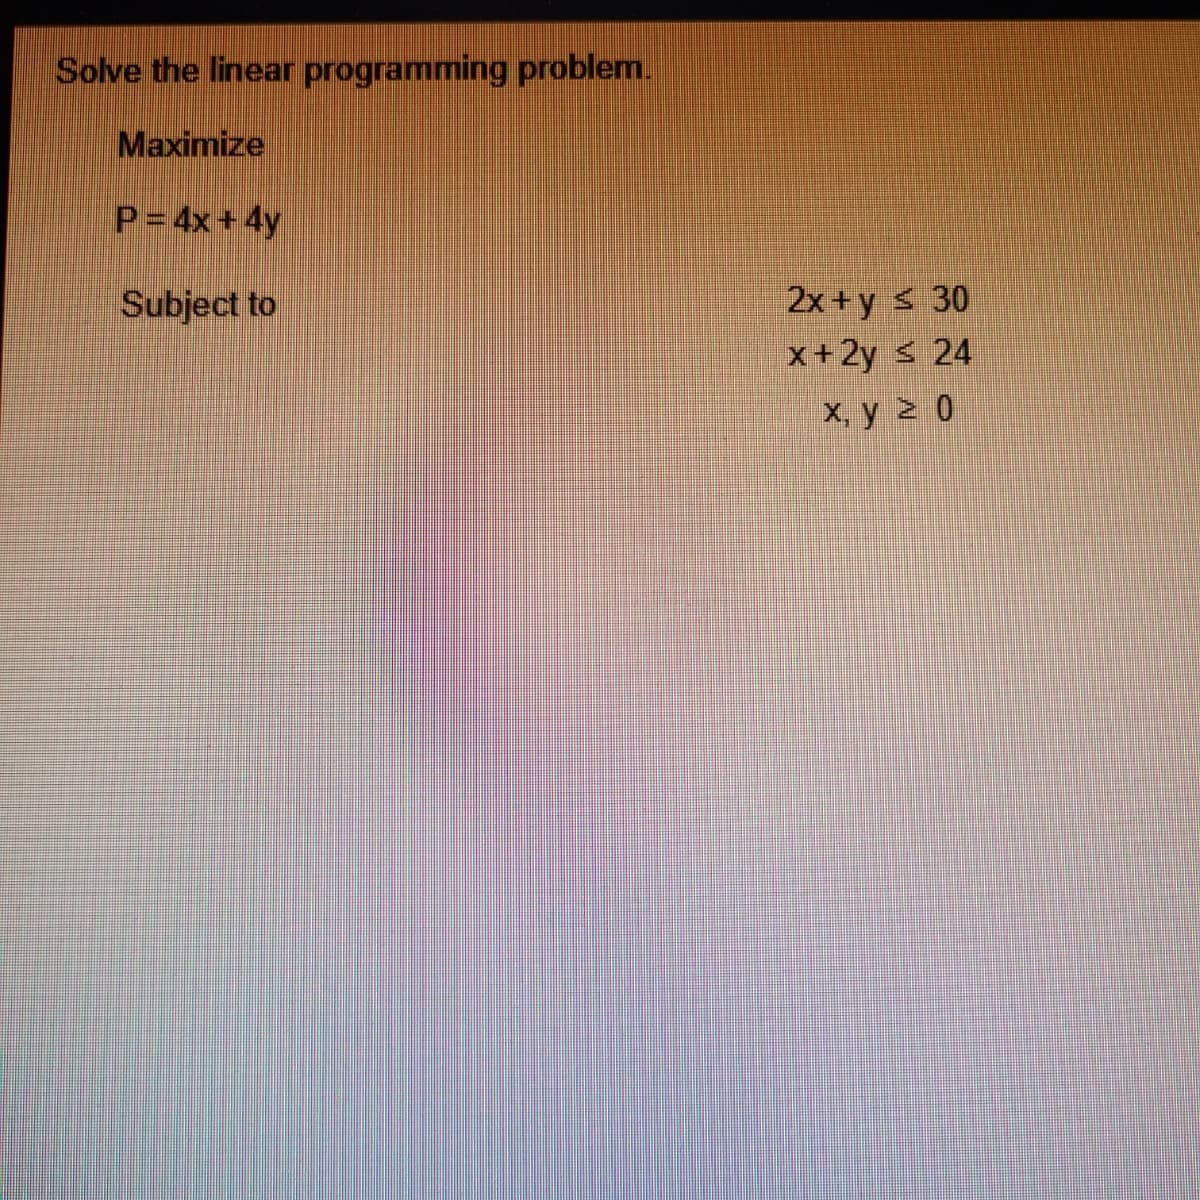 Solve the linear programming problem.
Maximize
P= 4x+ 4y
2x + y s 30
x+2y s 24
Subject to
х, у 2 0
